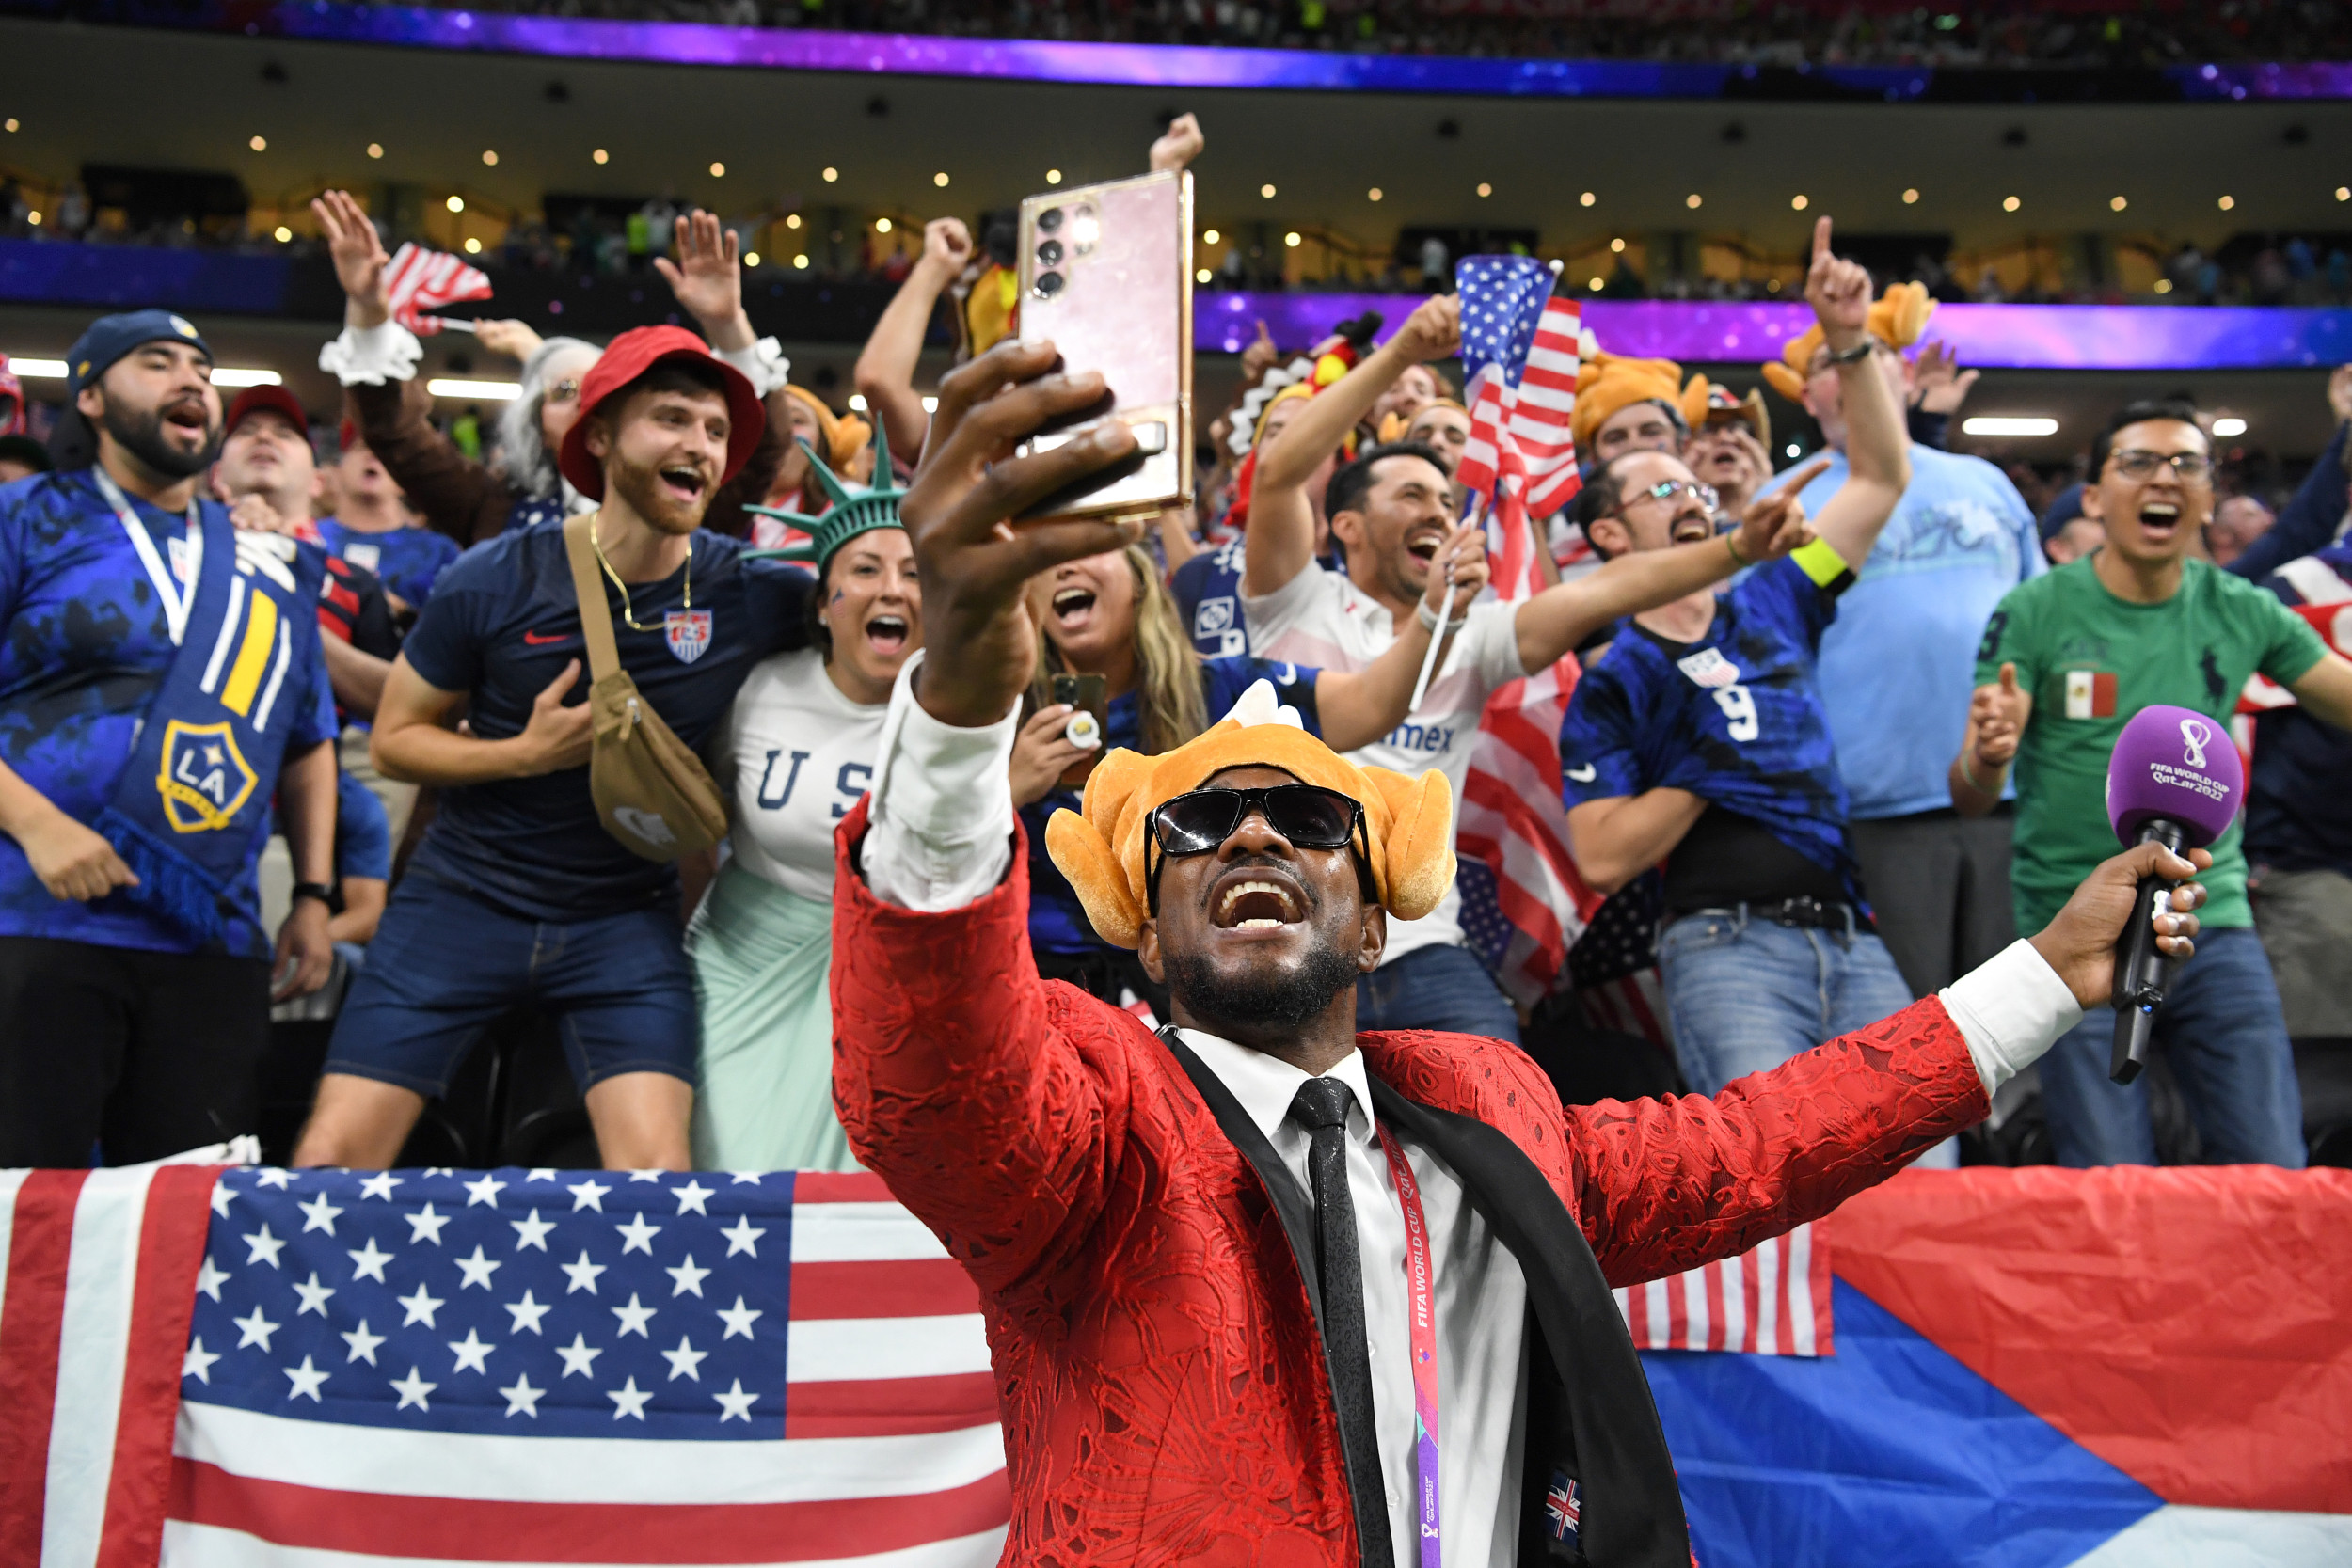 England Fans Mocked After U.S. World Cup Tie: 'Y'alls Main